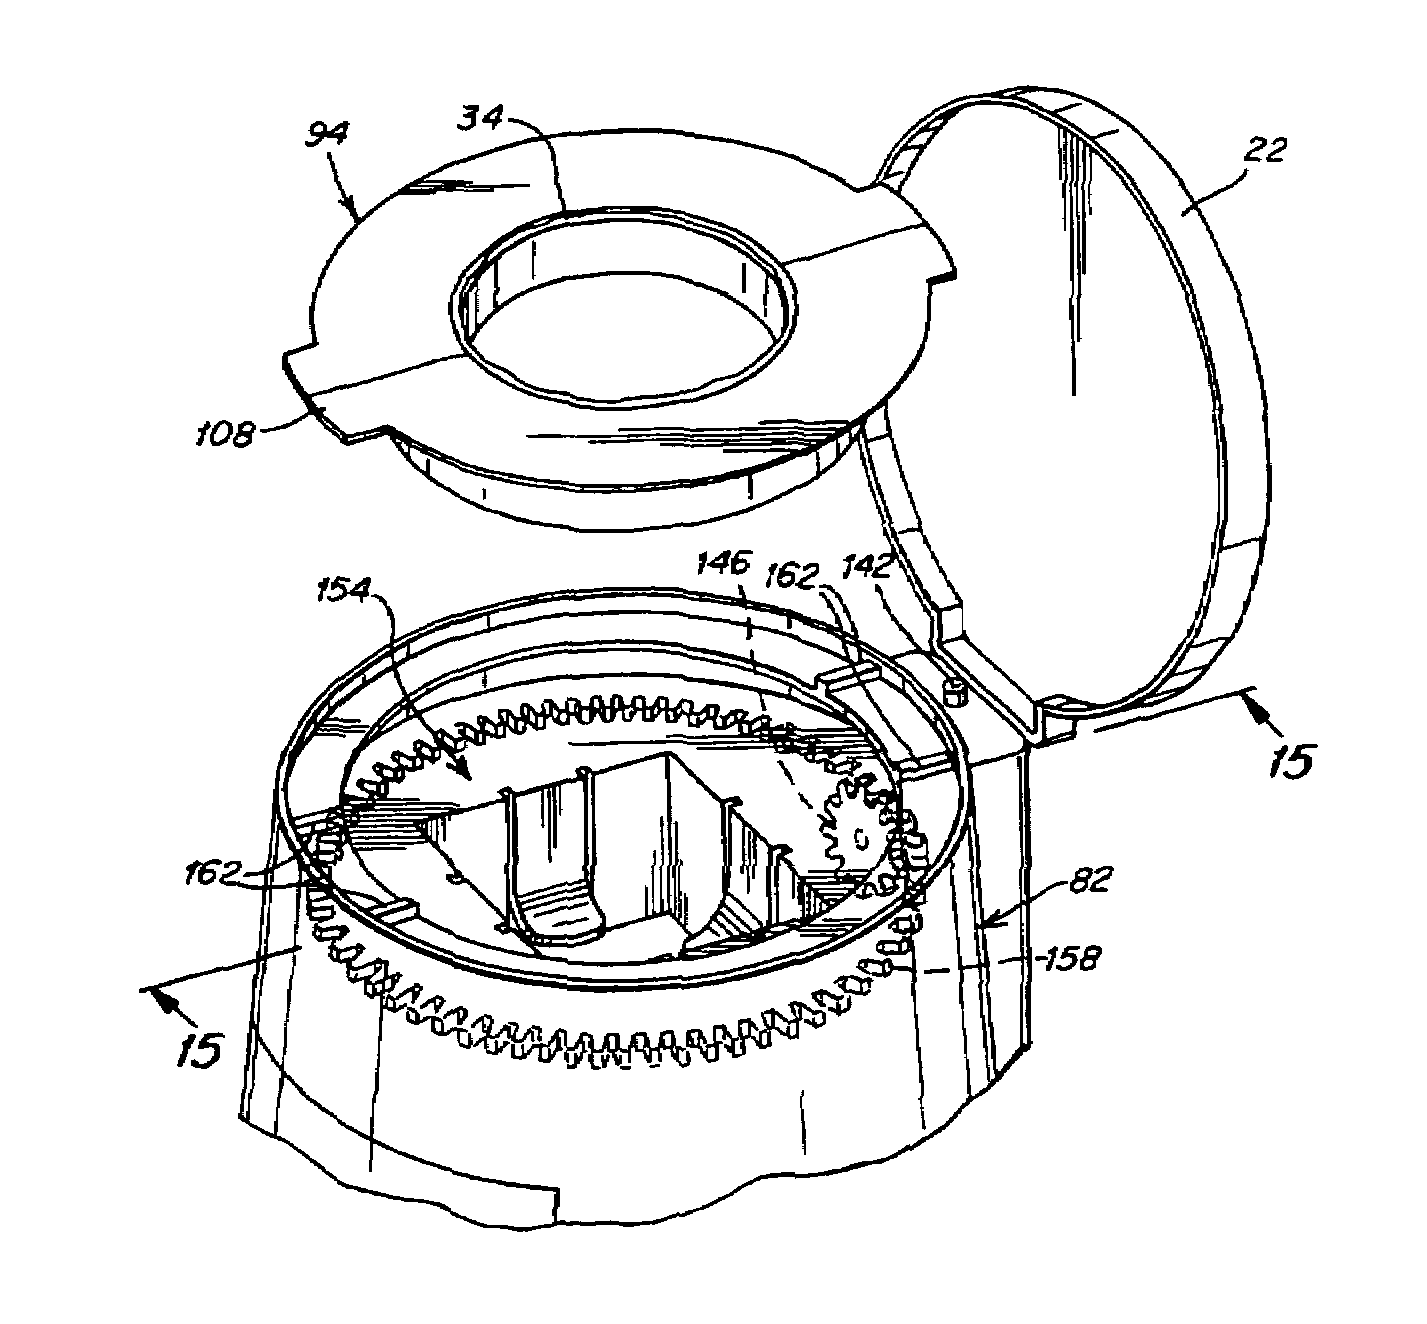 Waste disposal device including a rotatable geared rim to operate a cartridge